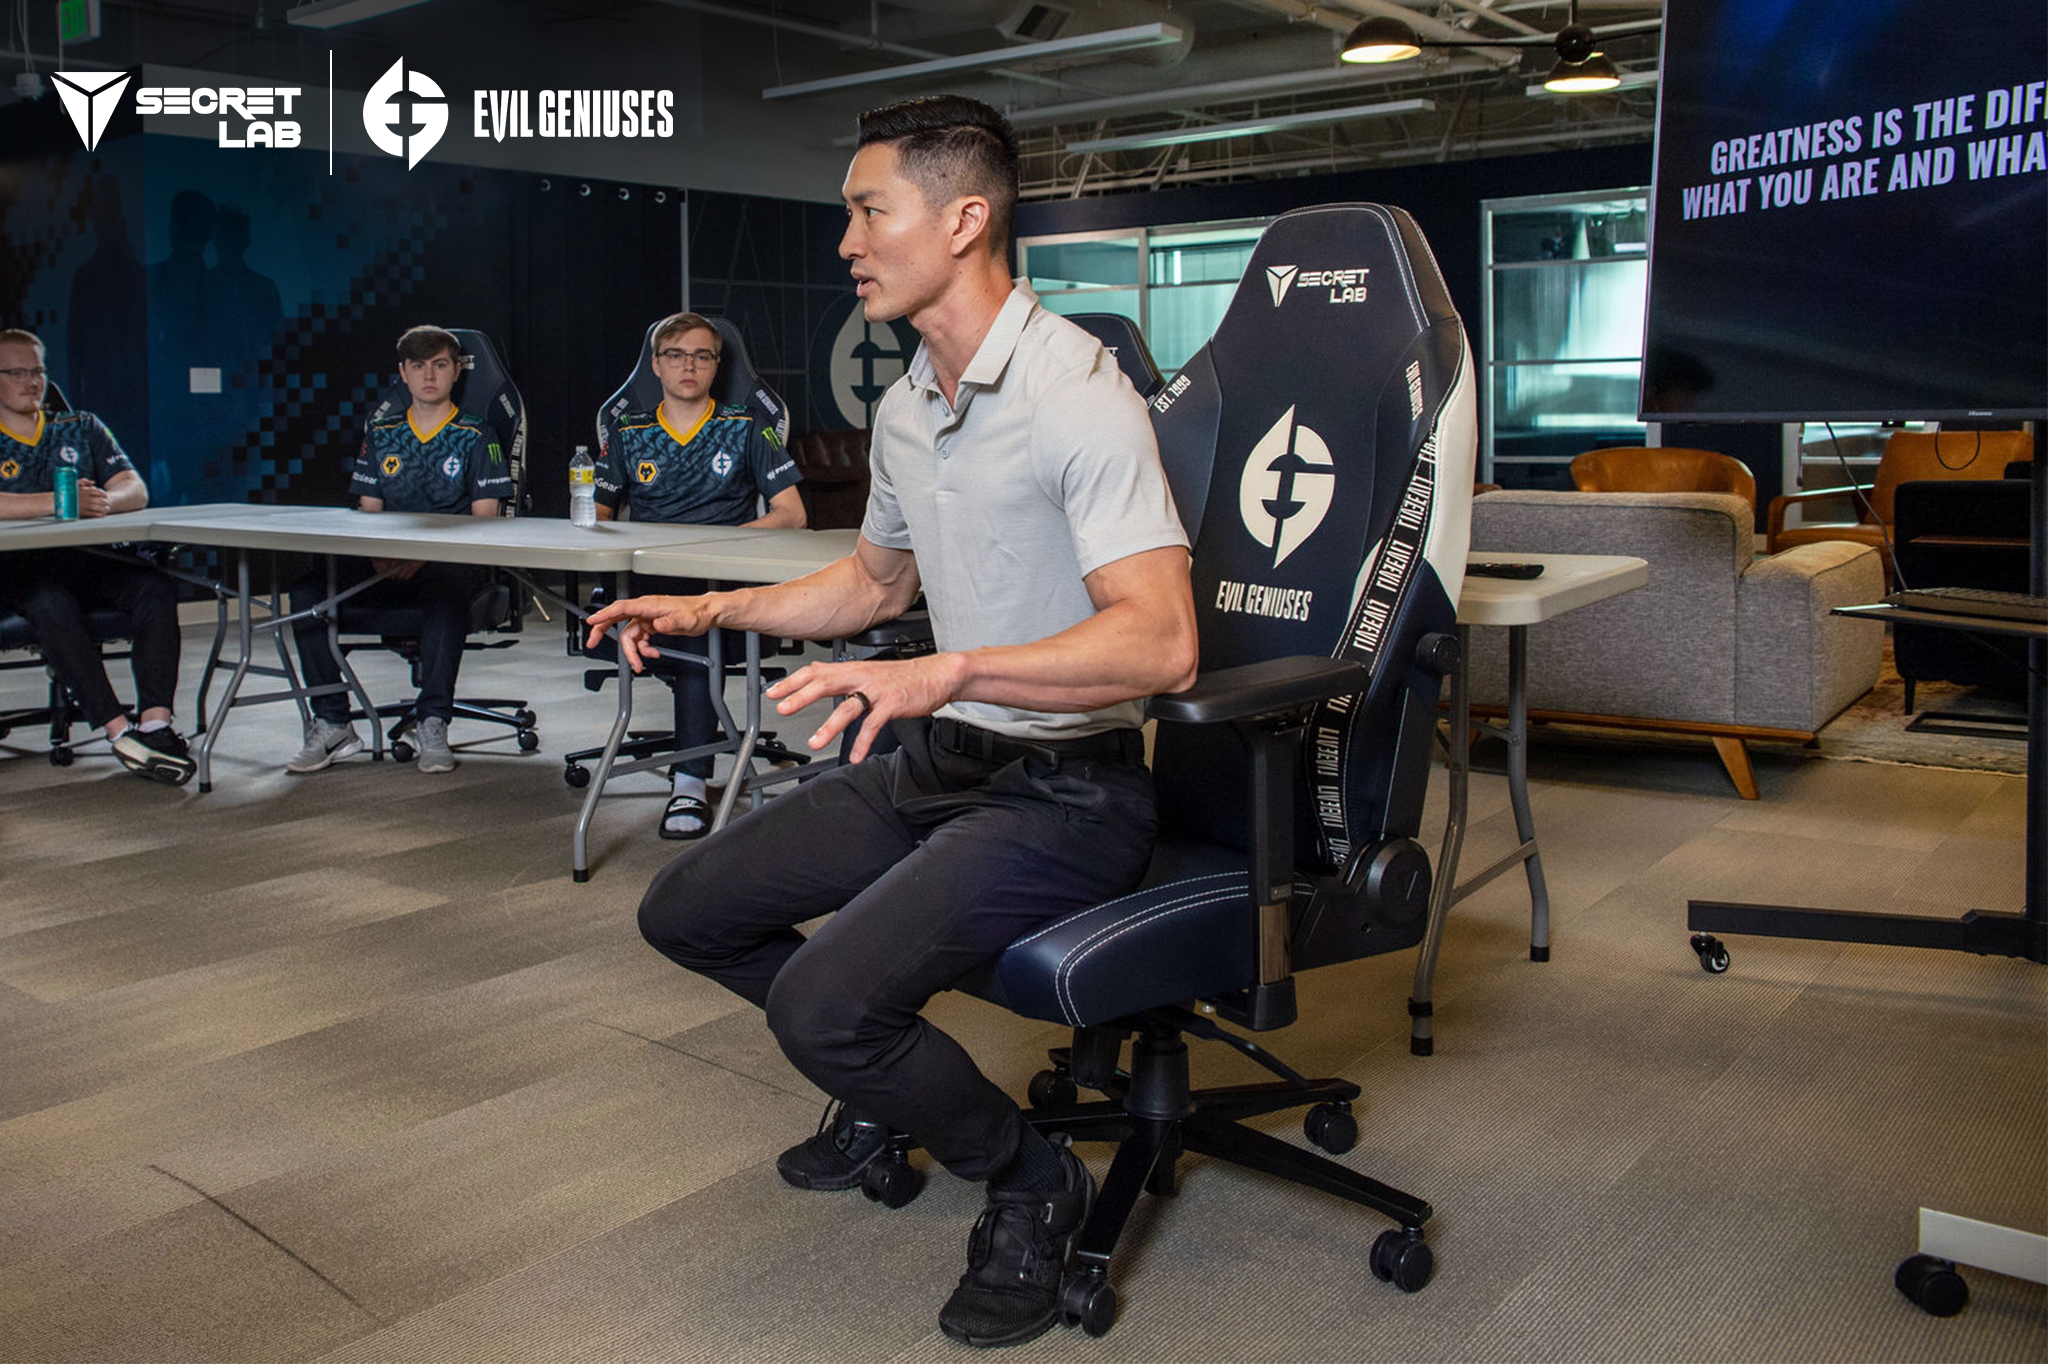 EAB member, Dr. Jordan Tsai (Esports physical therapist for Evil Geniuses and founder of Respawn Therapy) demonstrating the different optimal sitting positions at the Ergonomic Wellness Seminar.